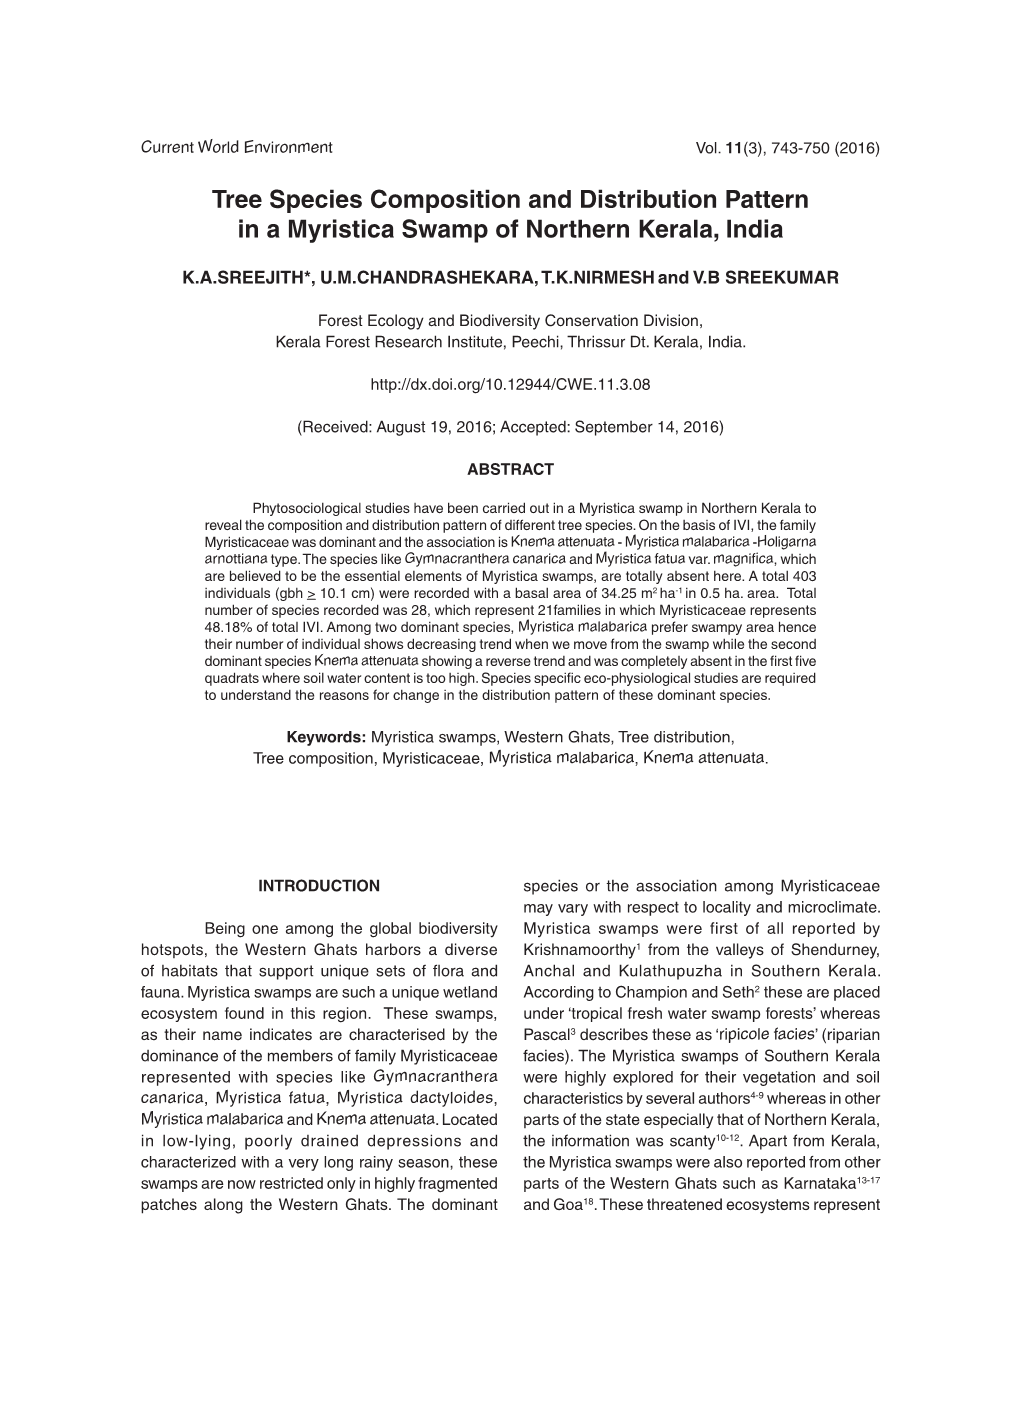 Tree Species Composition and Distribution Pattern in a Myristica Swamp of Northern Kerala, India